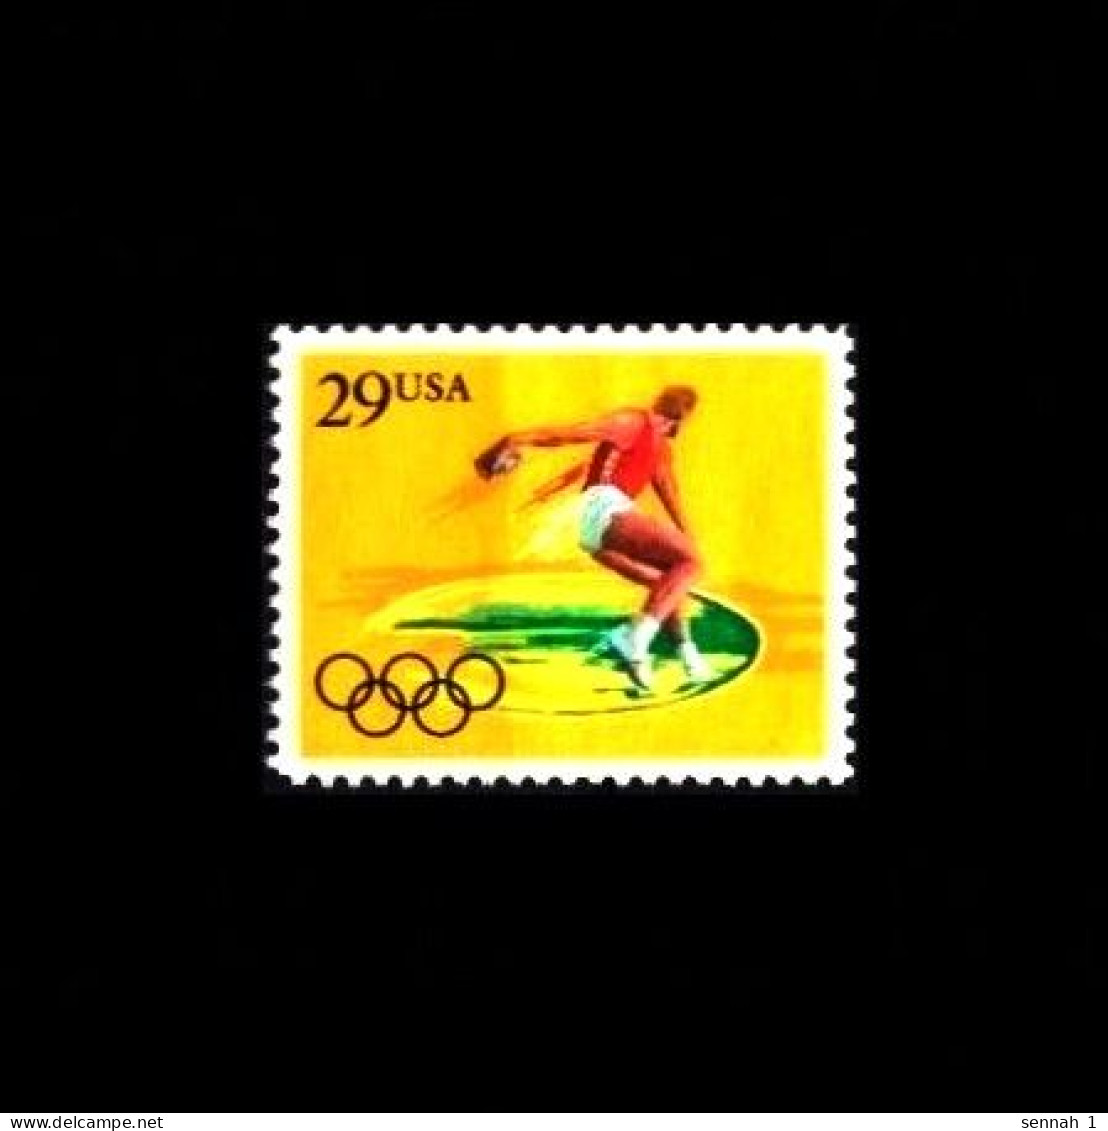 USA: 'Olympische Spiele – Diskuswerfen, 1991' / 'Barcelona Olympics – Discus', Mi. 2156; Yv. 1958; Sc. 2554; SG 2596 [*] - Used Stamps